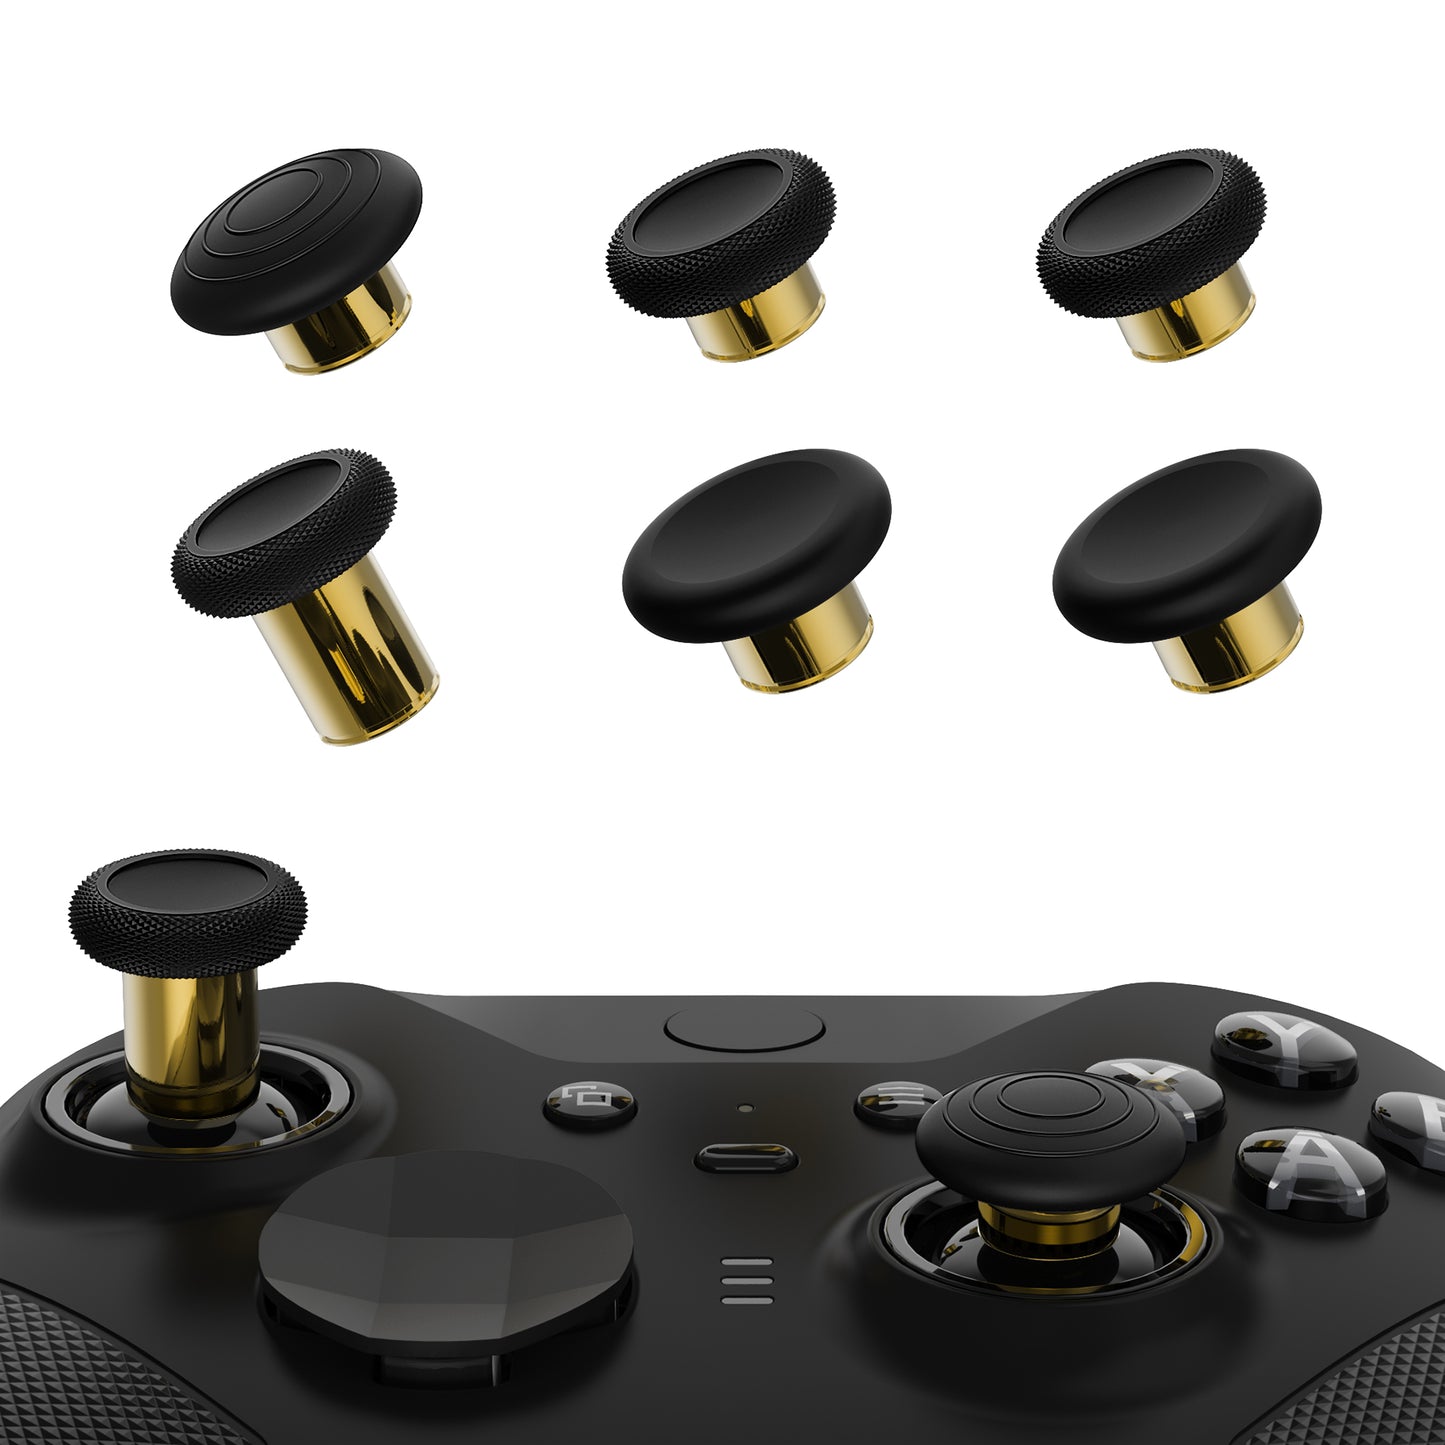 6 in 1 Metal Replacement Thumbsticks for Xbox Elite Series 2 & Elite 2 Core Controller (Model 1797) - Black & Metallic Hero Gold eXtremeRate